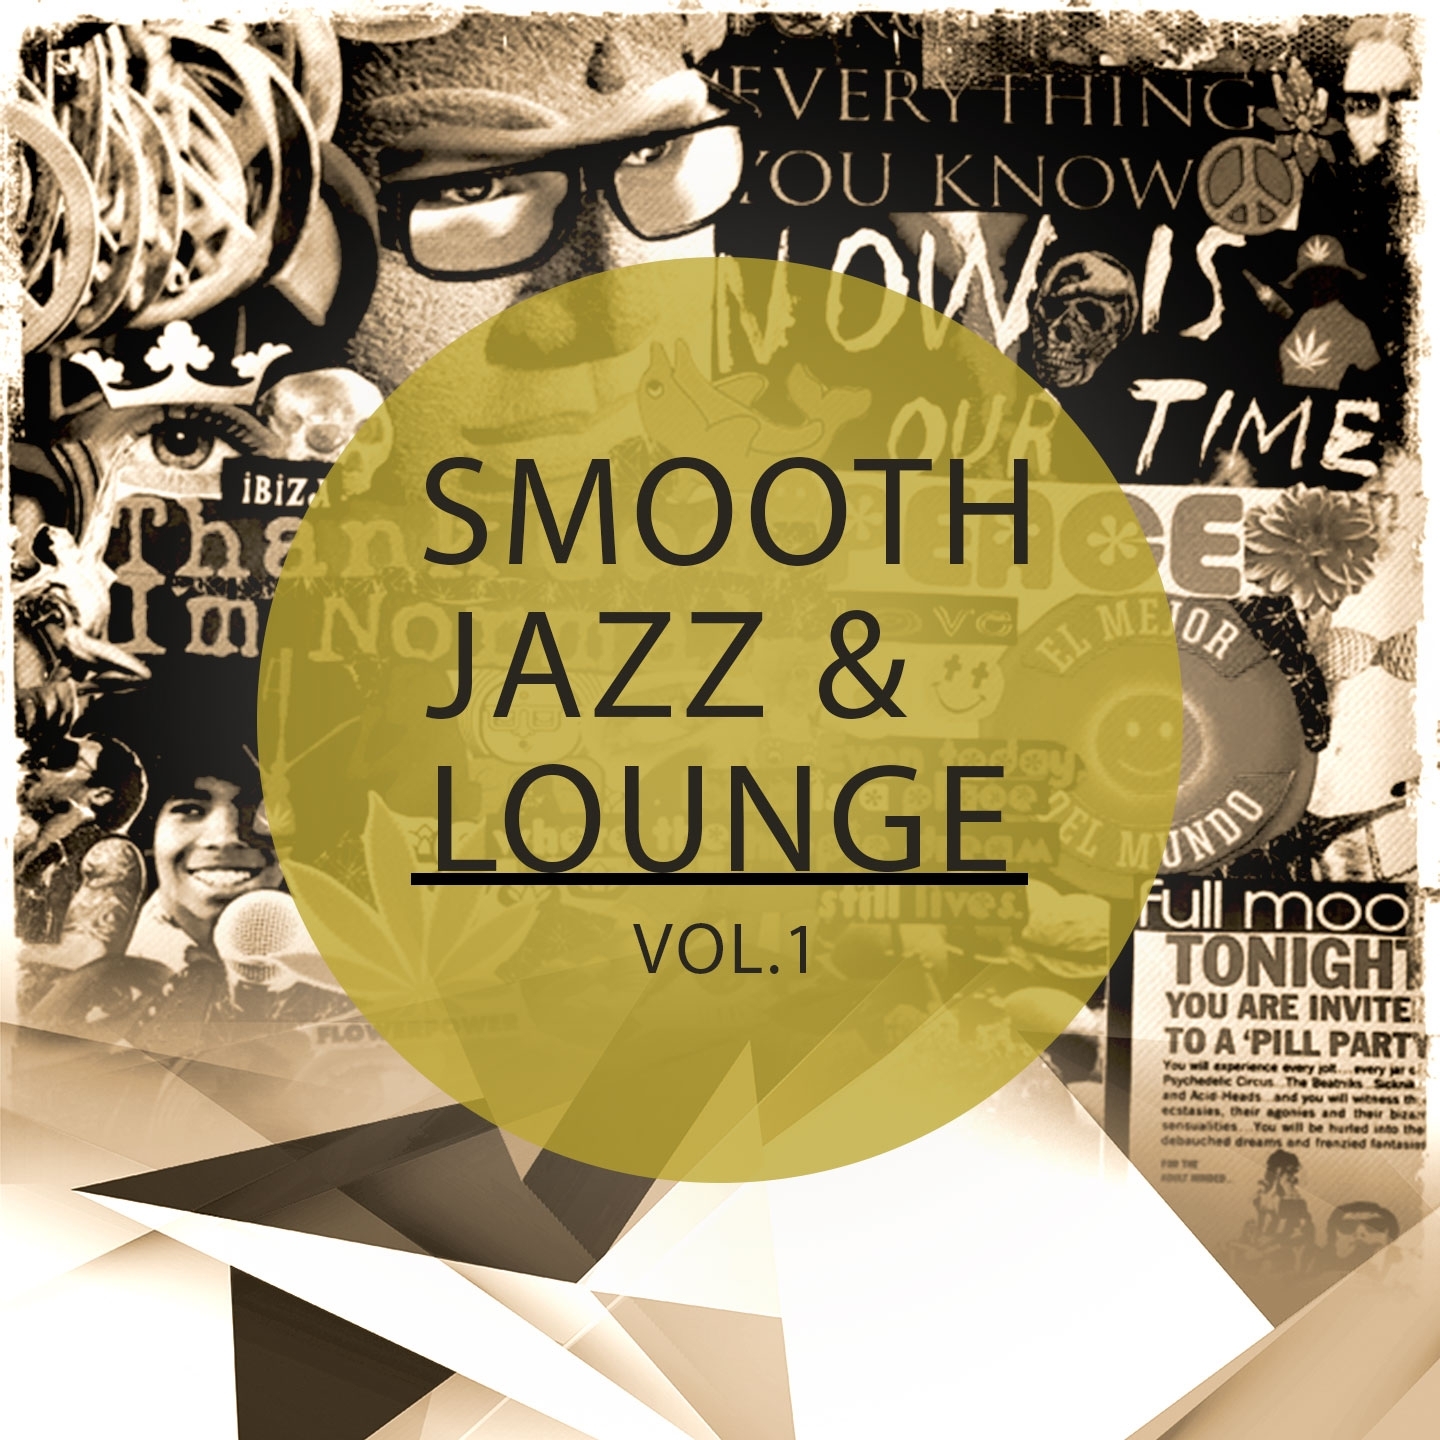 Smooth Jazz & Lounge, Vol. 1 (Finest Selection of Bar Jazz & Chilling Lounge Tunes)